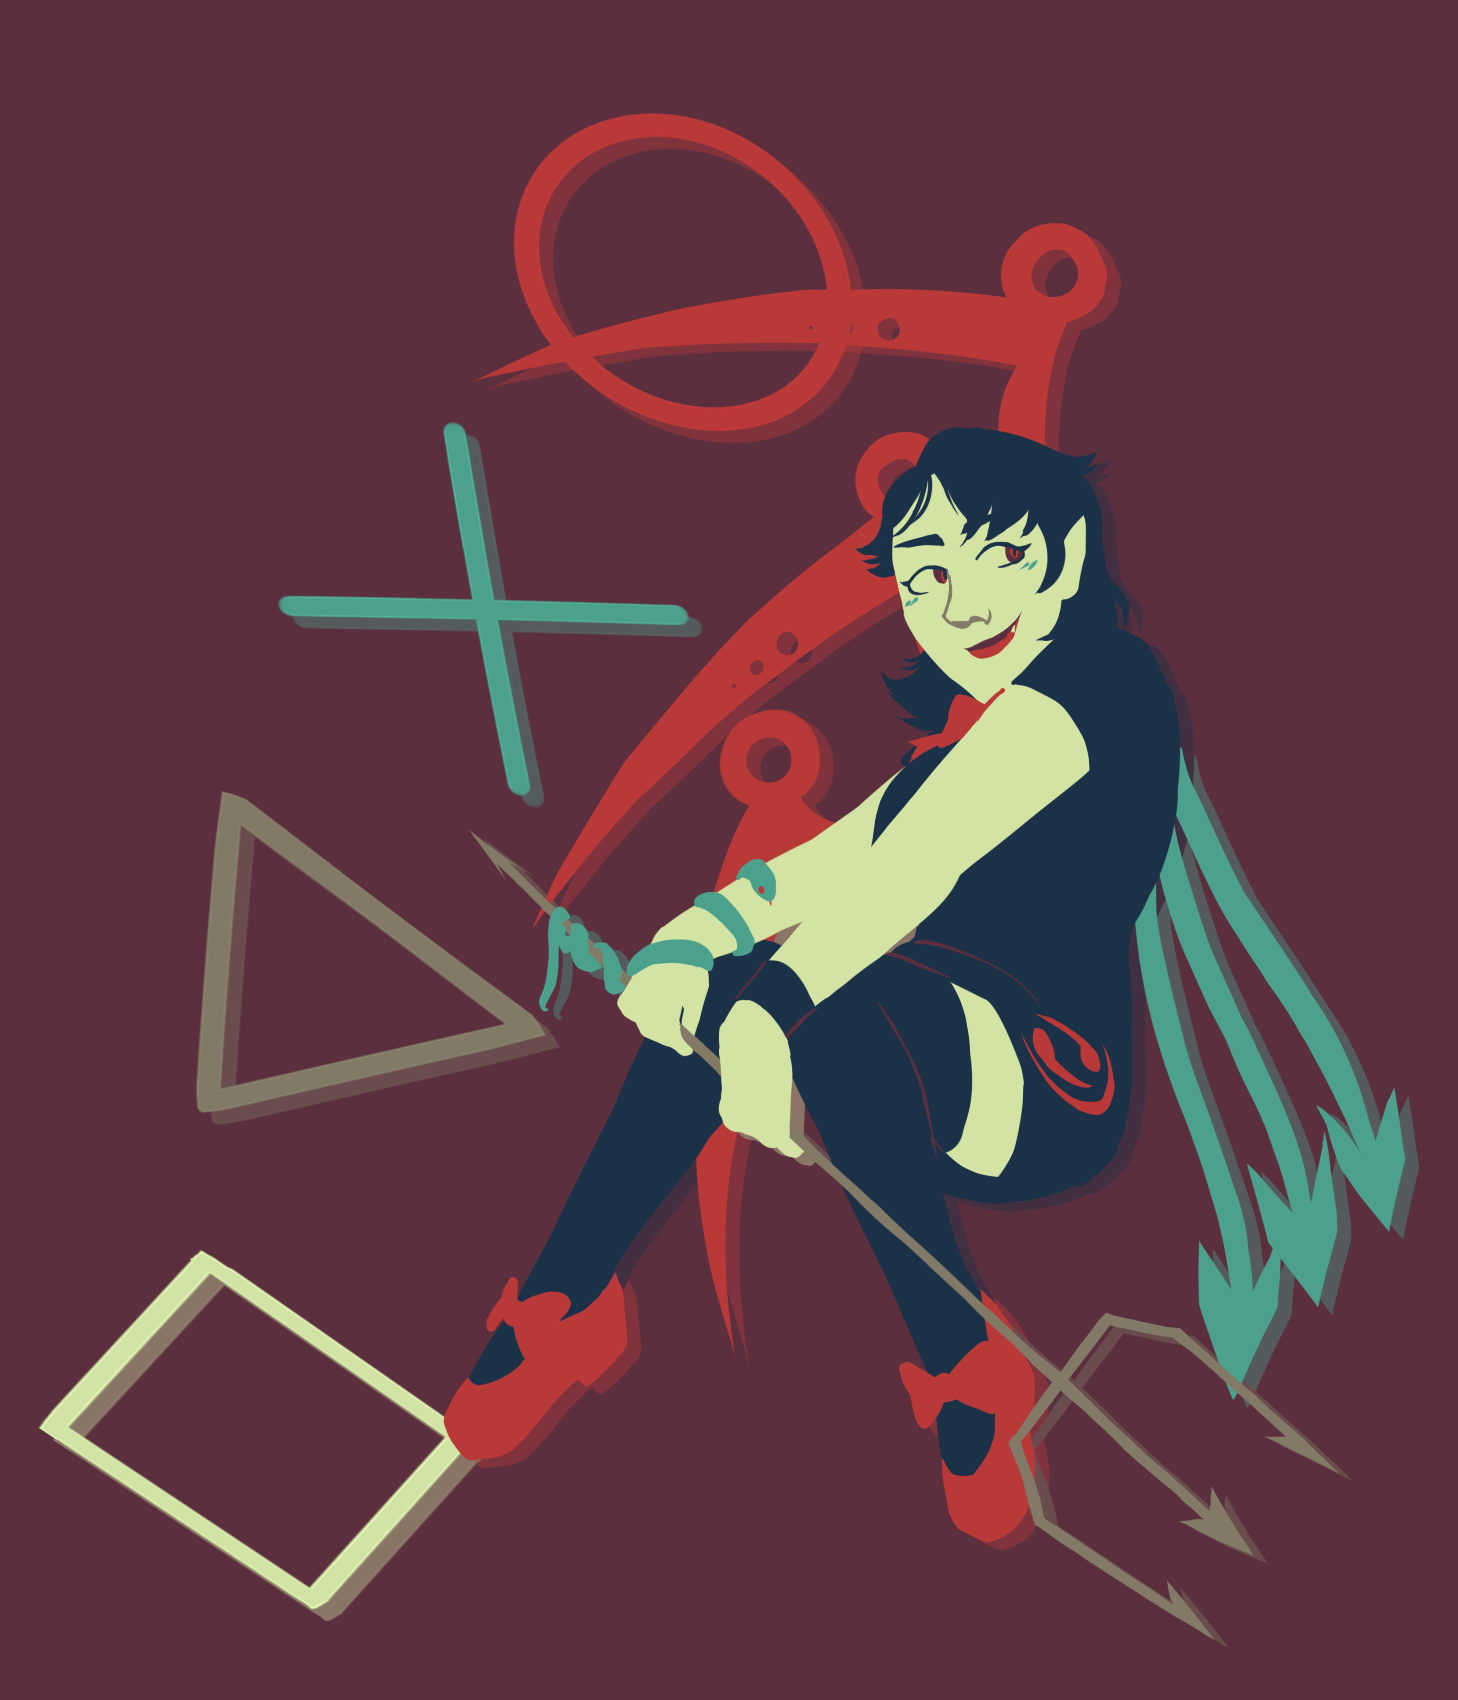 a drawing of Houjuu Nue from Touhou. Behind her are a circle, an X, a triangle, and a square